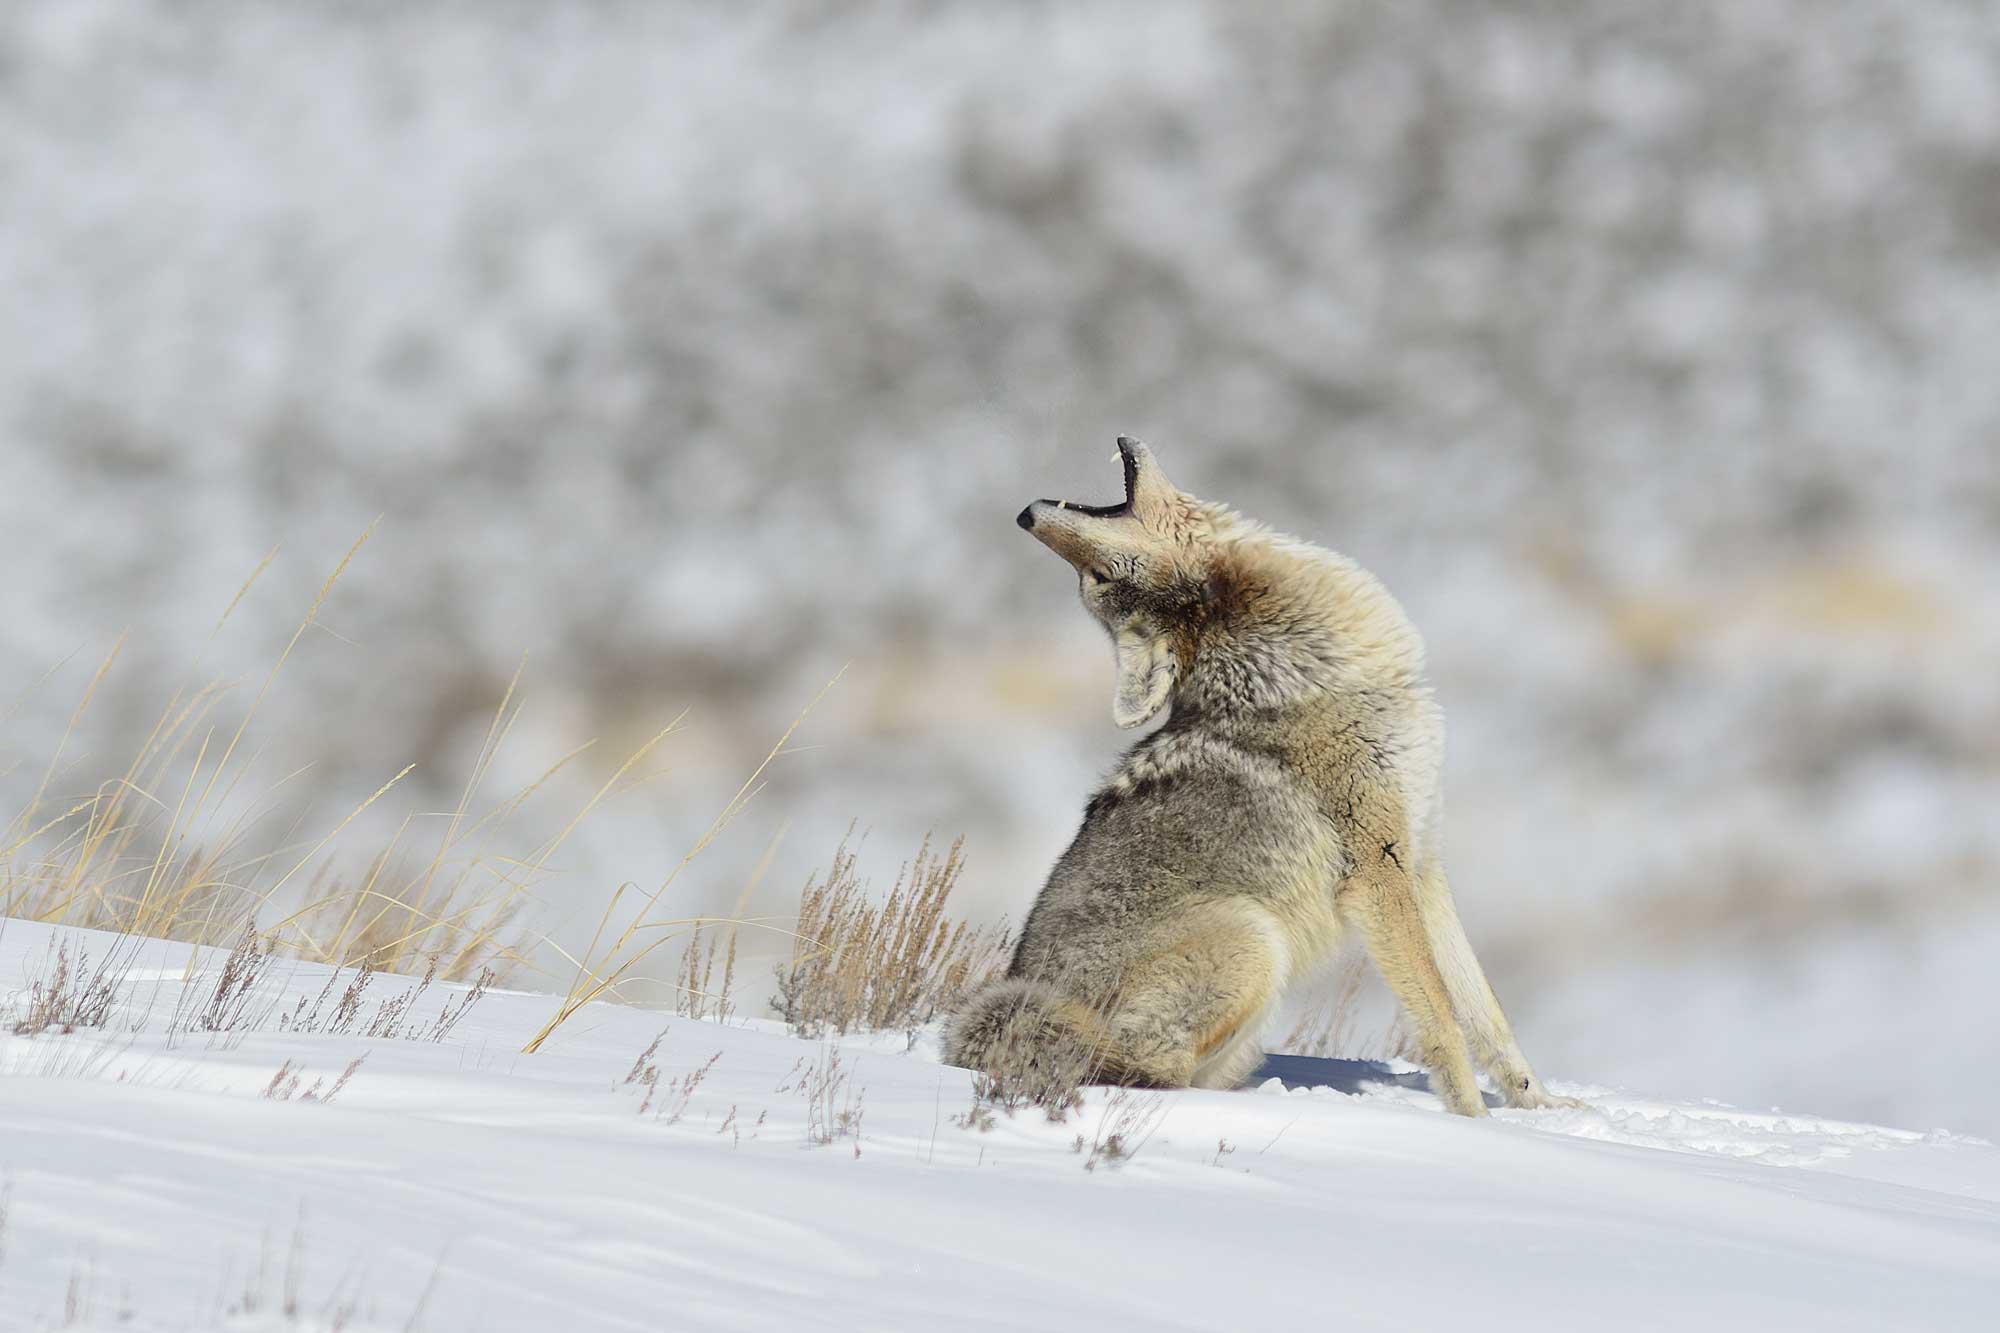 A coyote howling in the snow